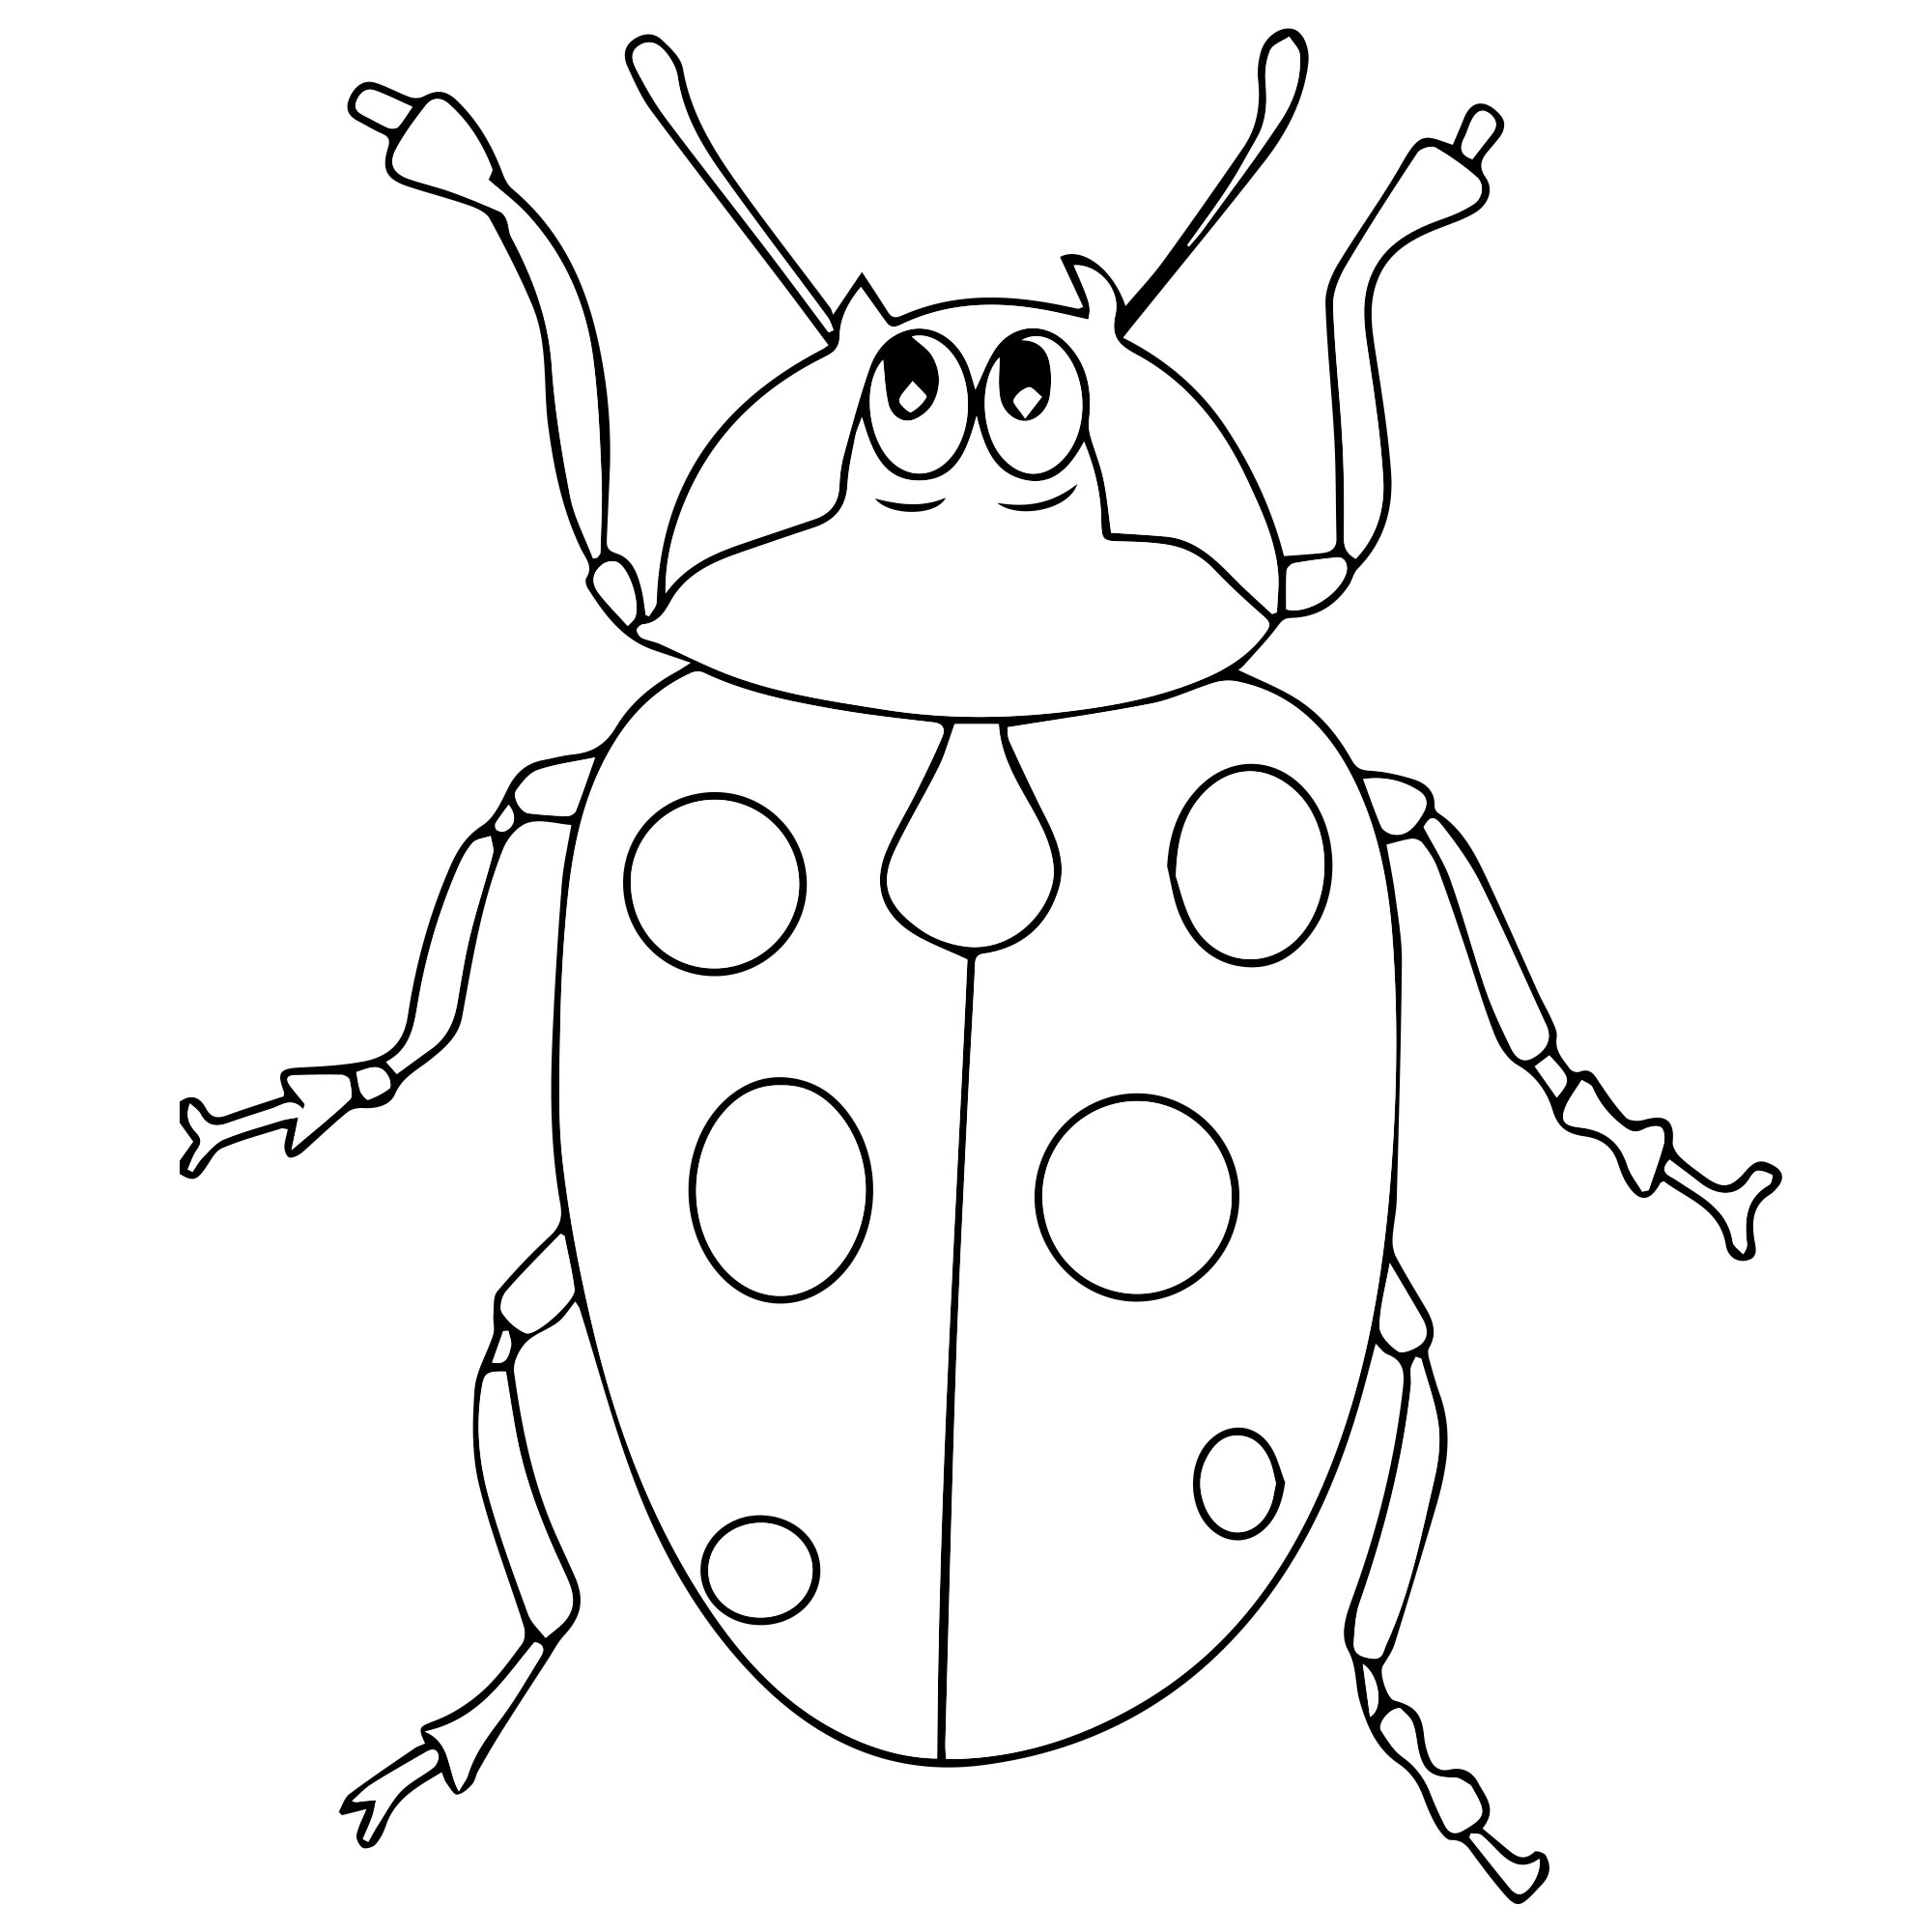 Inspirational bug coloring book for 3-4 year olds